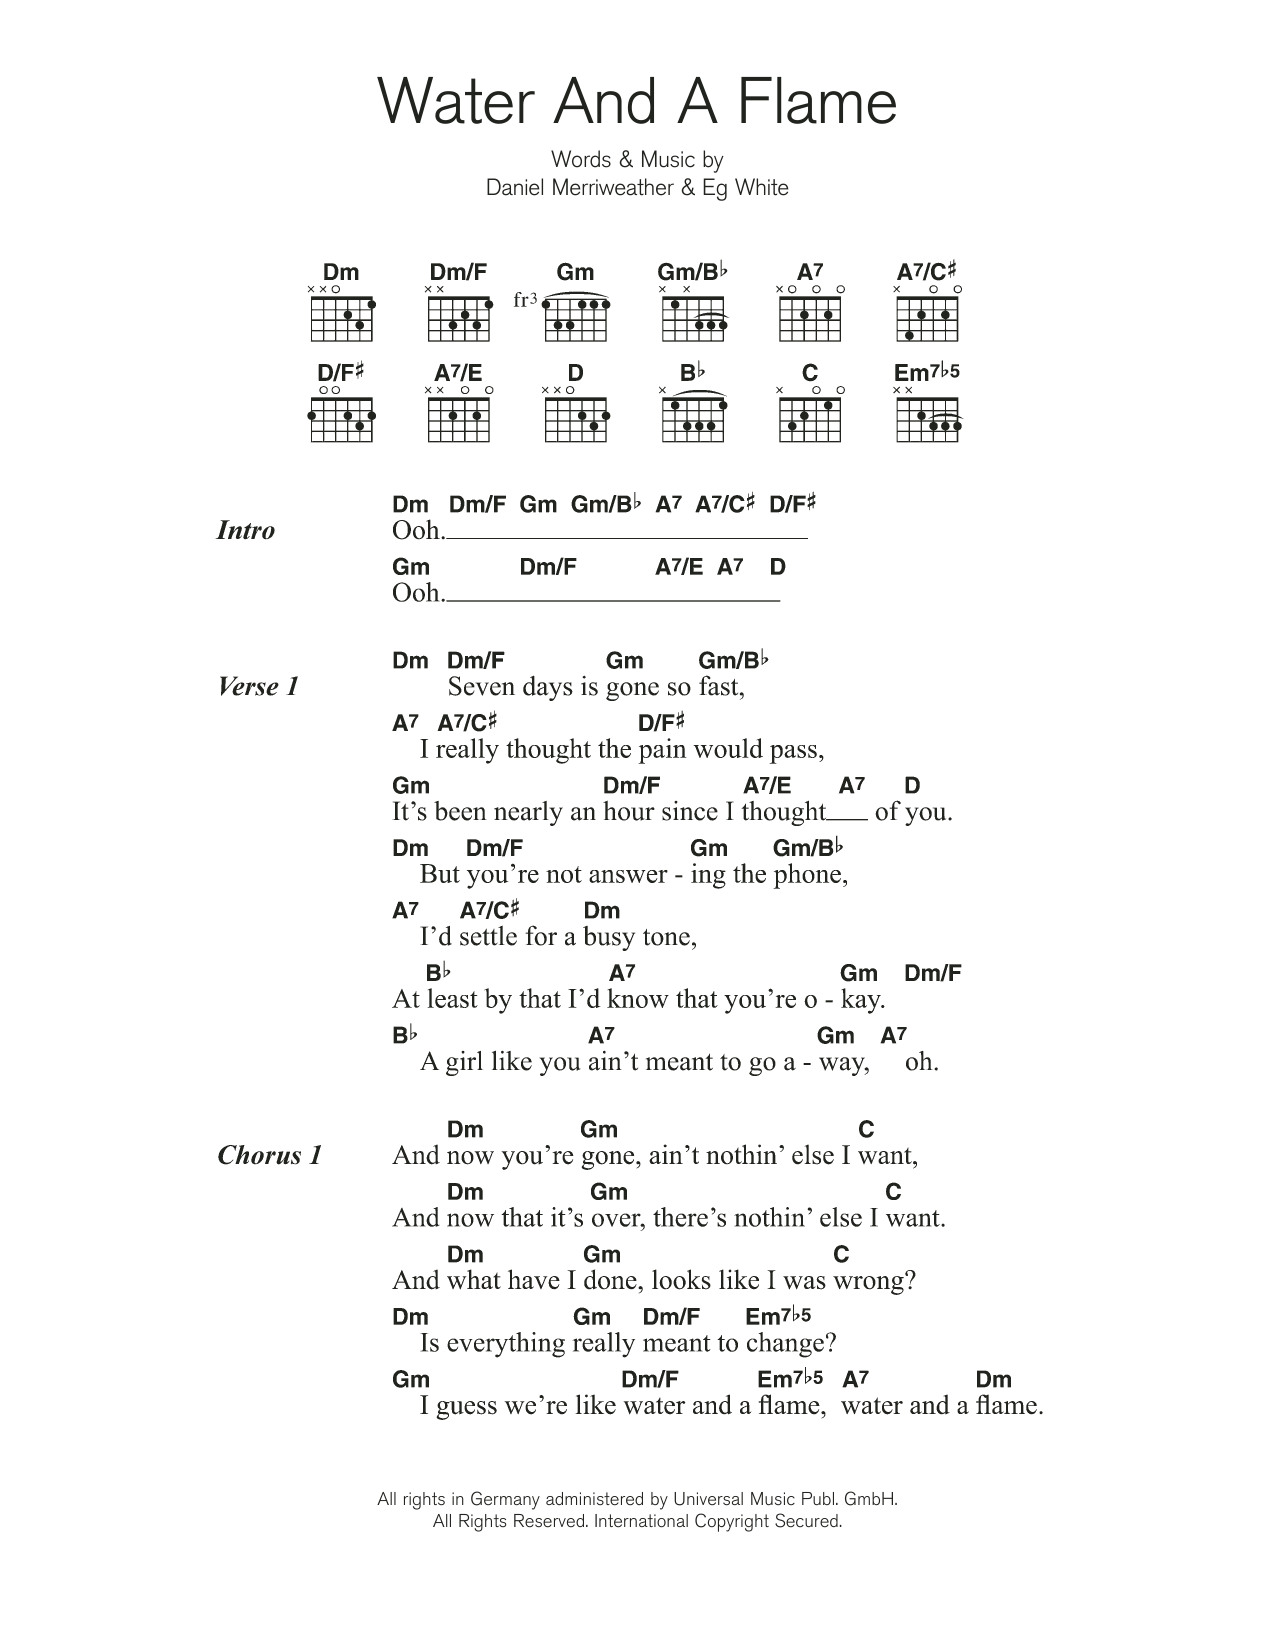 Download Daniel Merriweather Water And A Flame (featuring Adele) Sheet Music